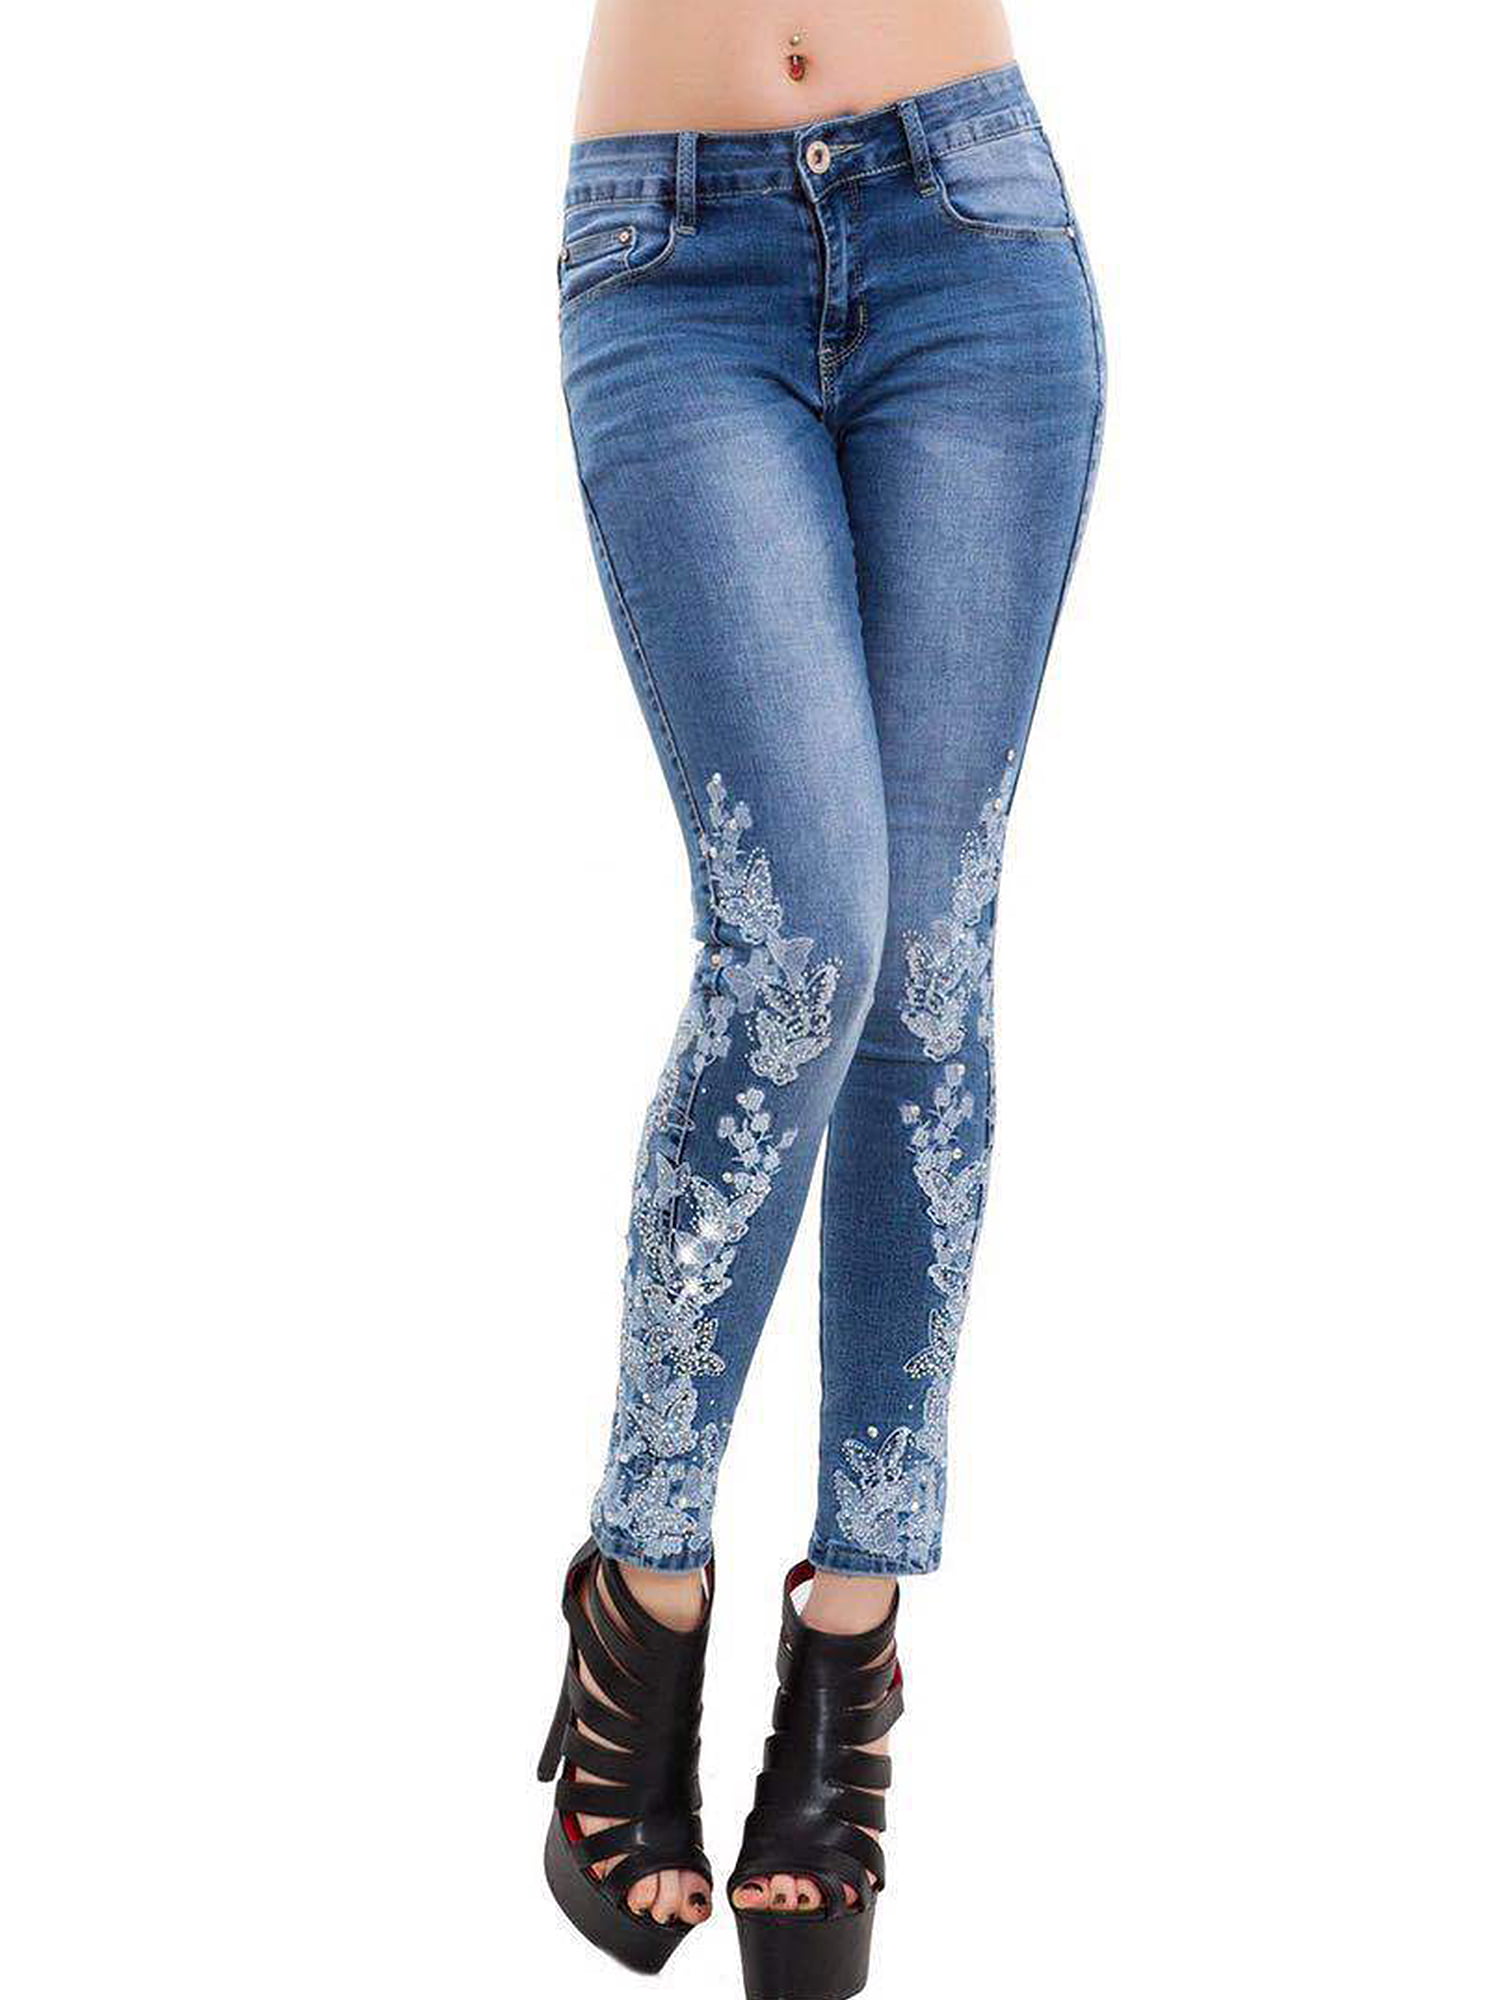 Sexy Dance - Women's Skinny Stretch Jeans Embroidered High Waisted Butt ...